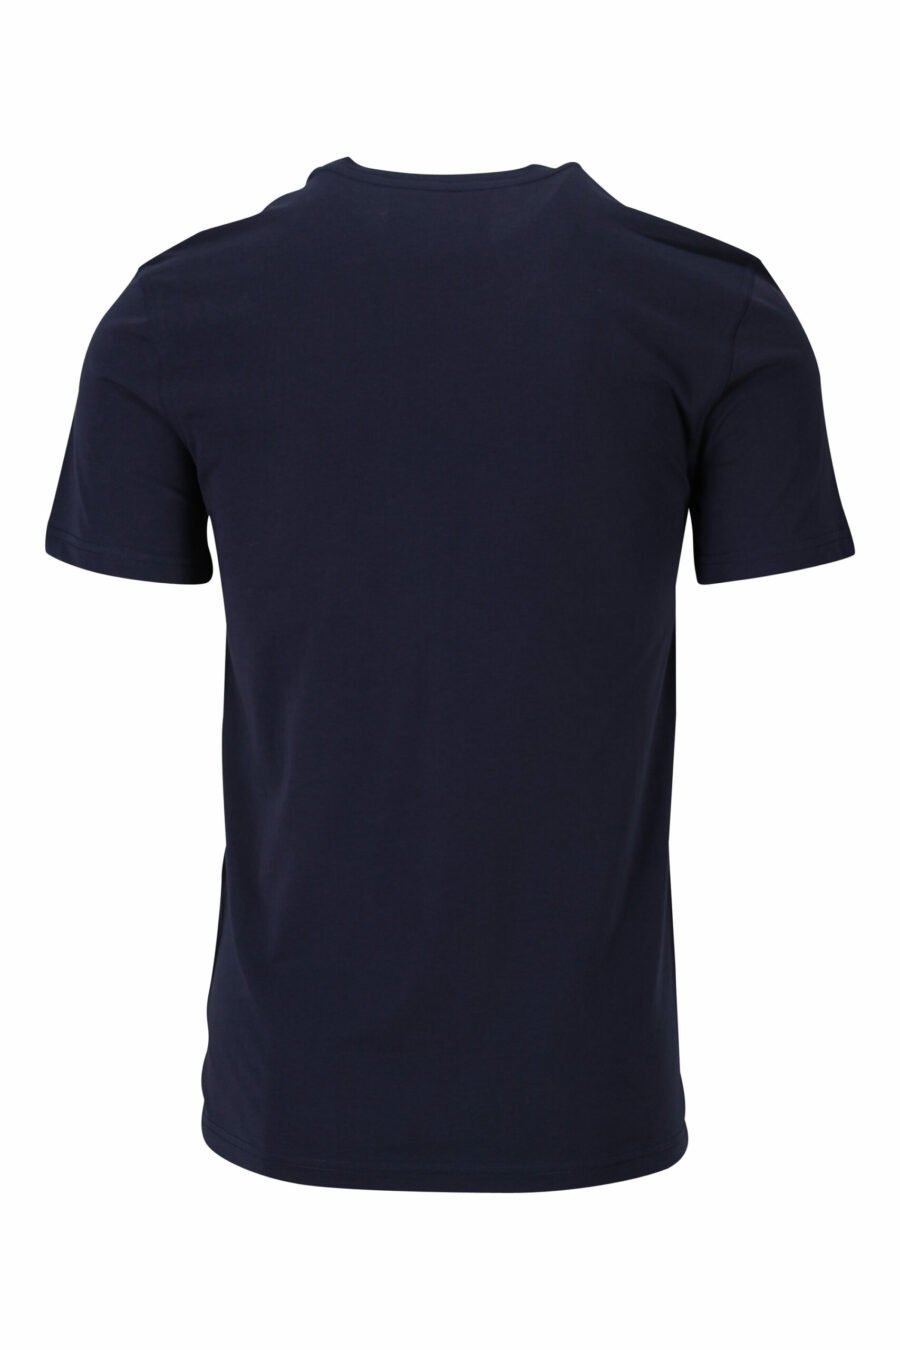 Dark blue T-shirt with "teddy" tailor-made maxilogo - 667113124827 1 scaled